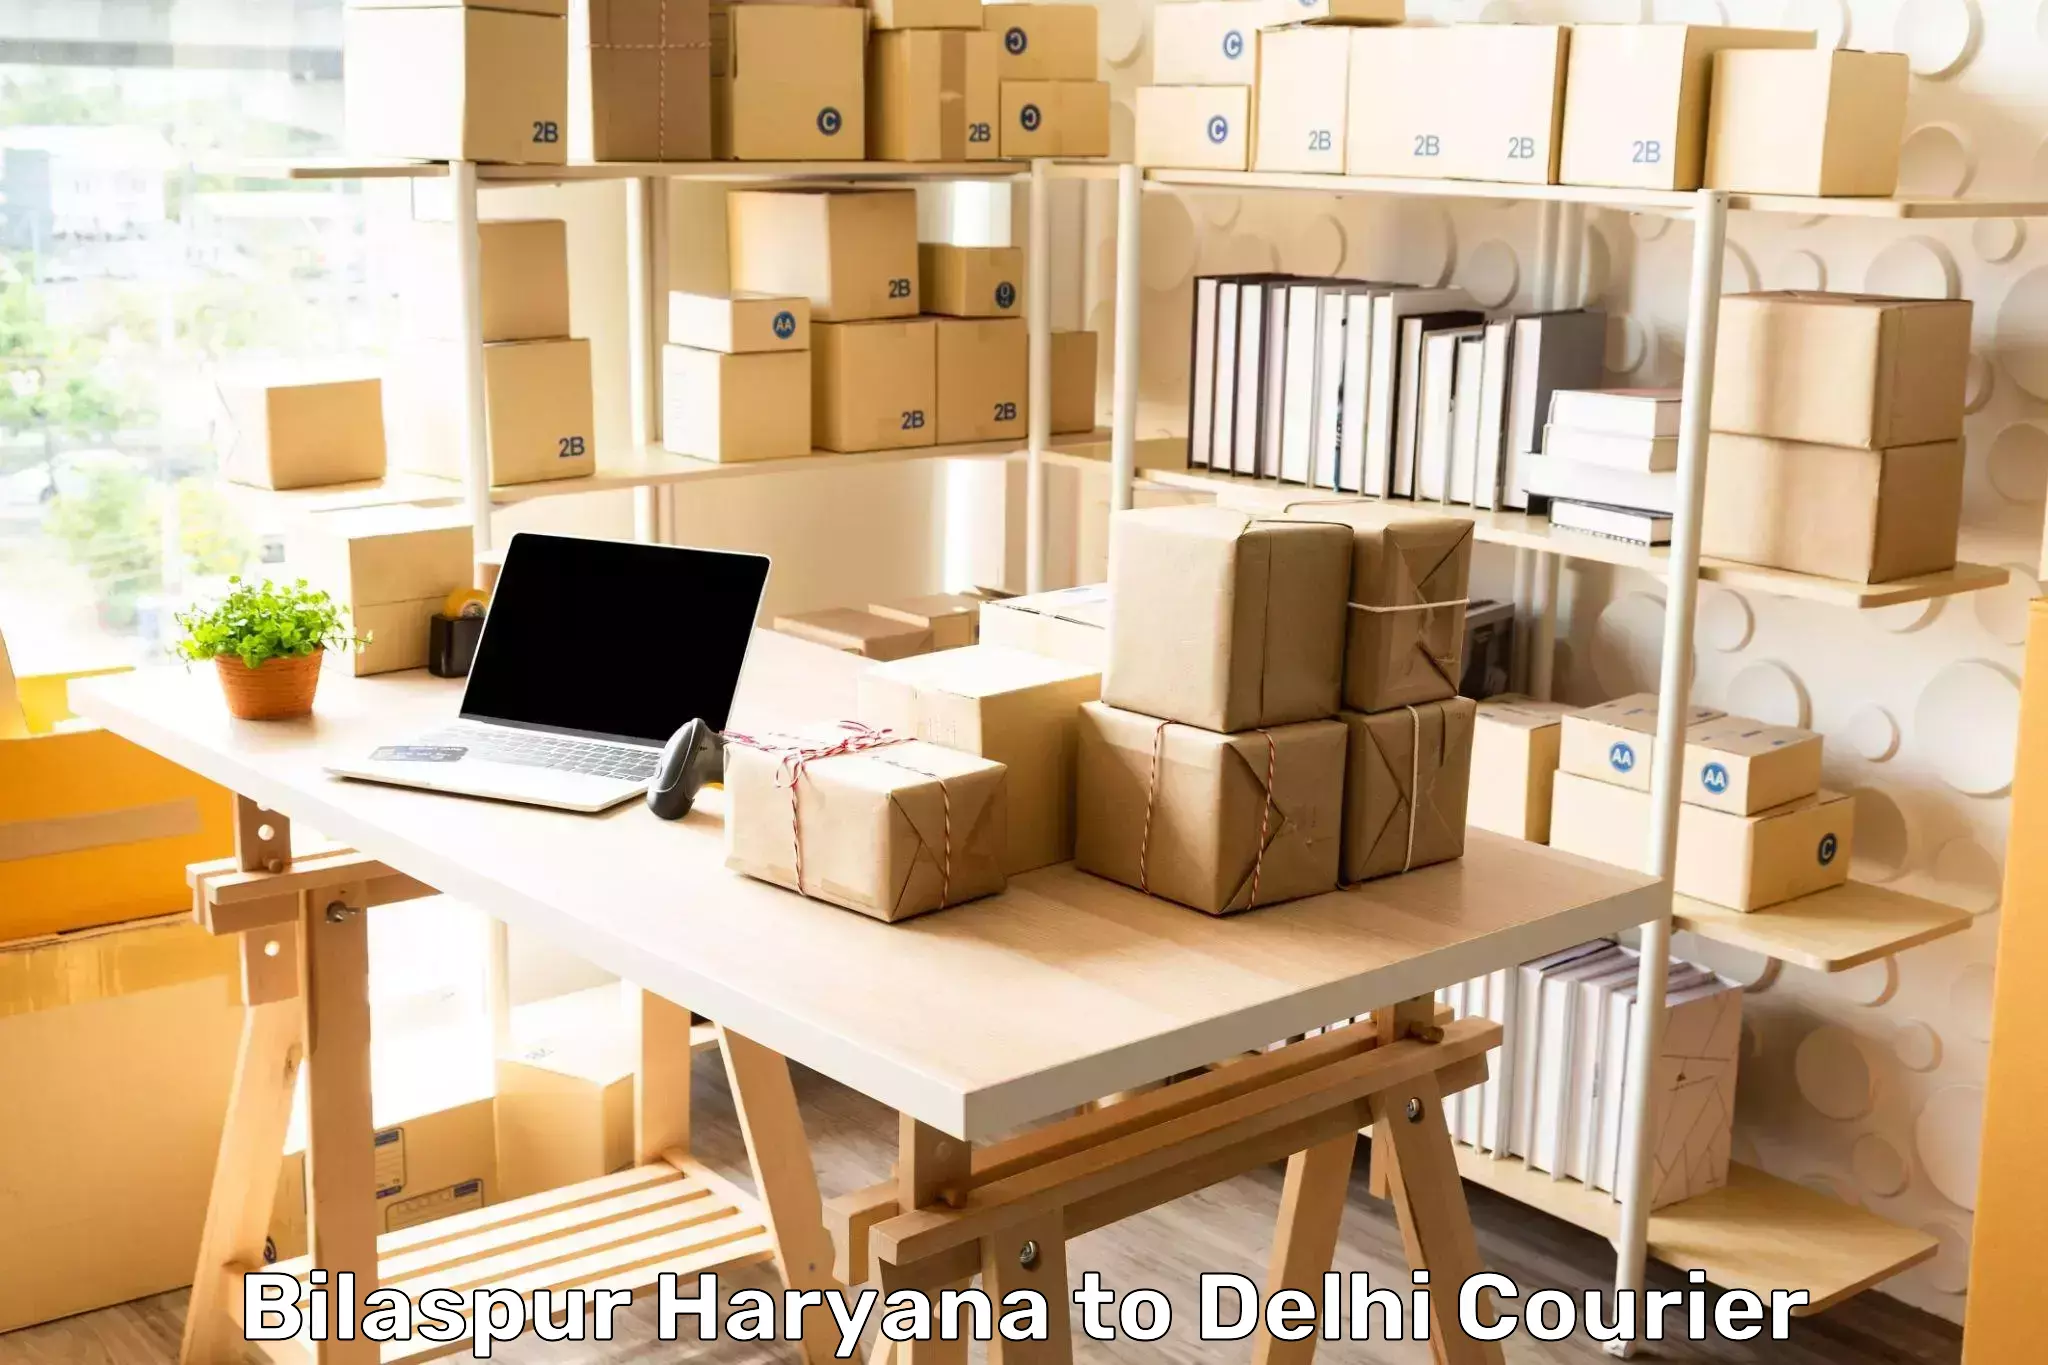 On-call courier service Bilaspur Haryana to NCR